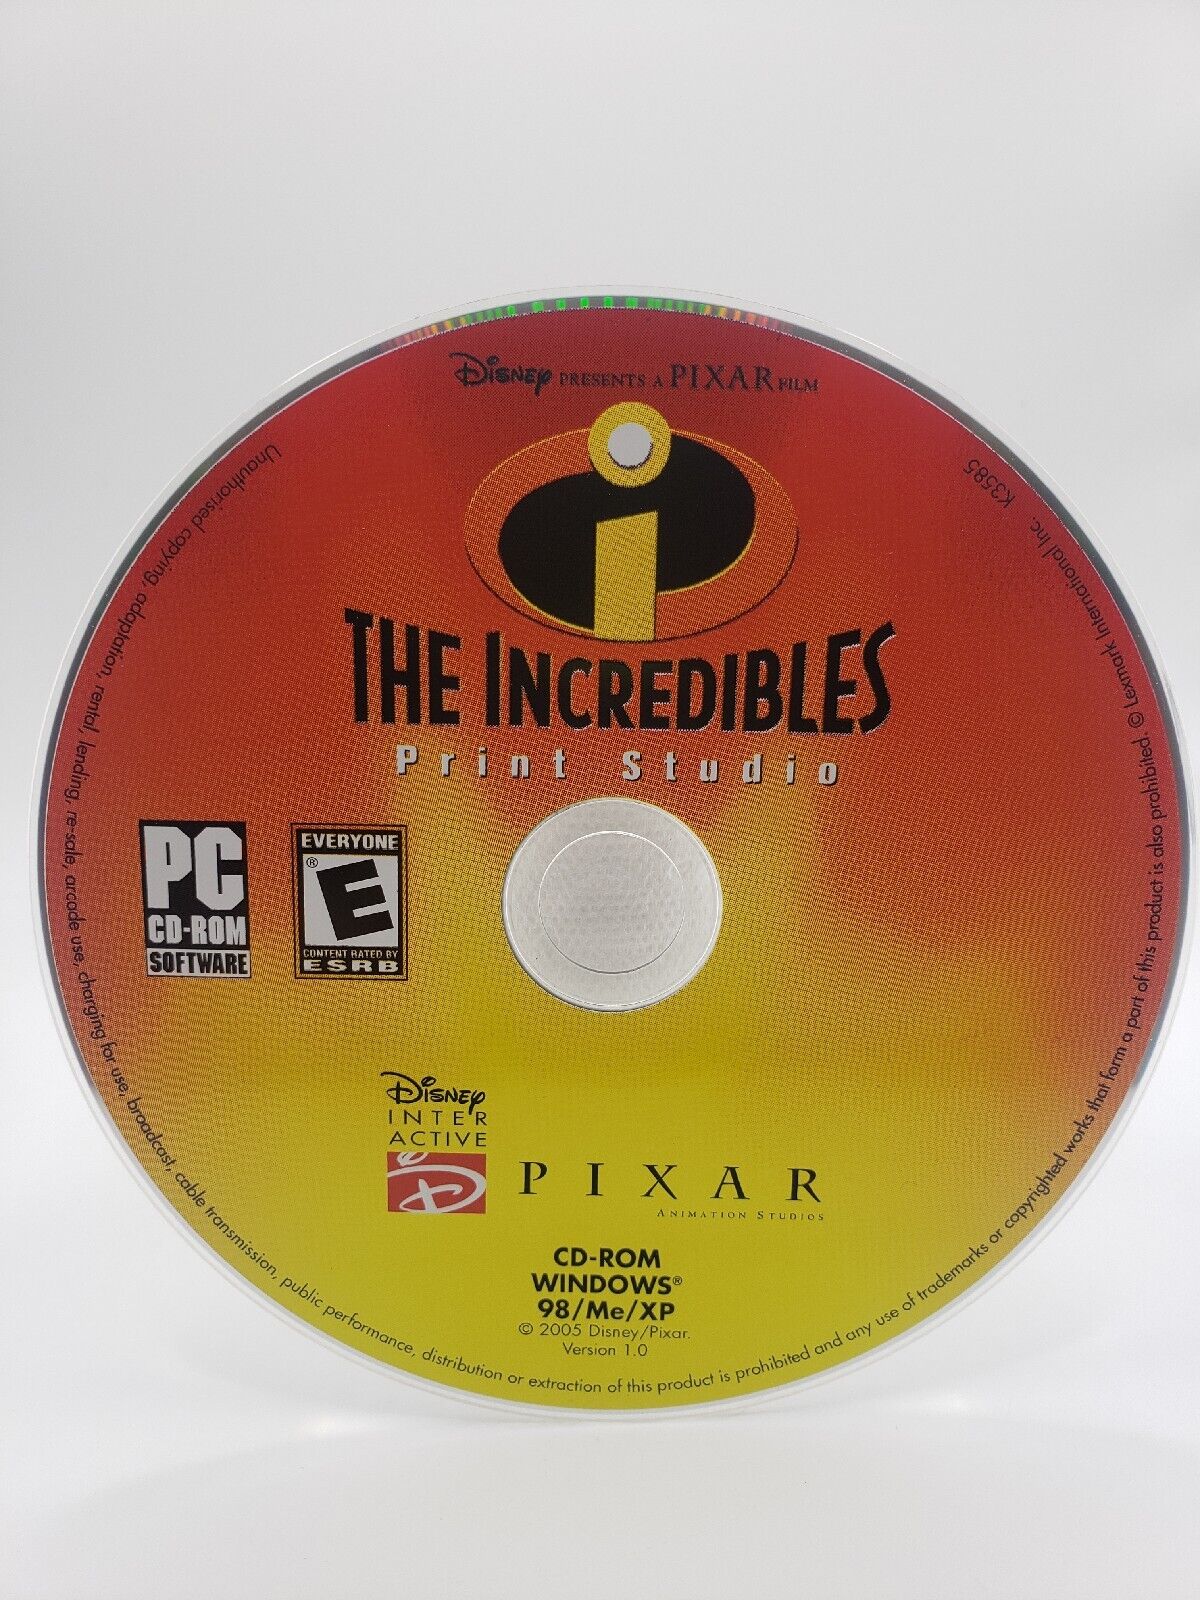 The Incredibles - Print Studio by Pixar (2006, PC) - Disc Only